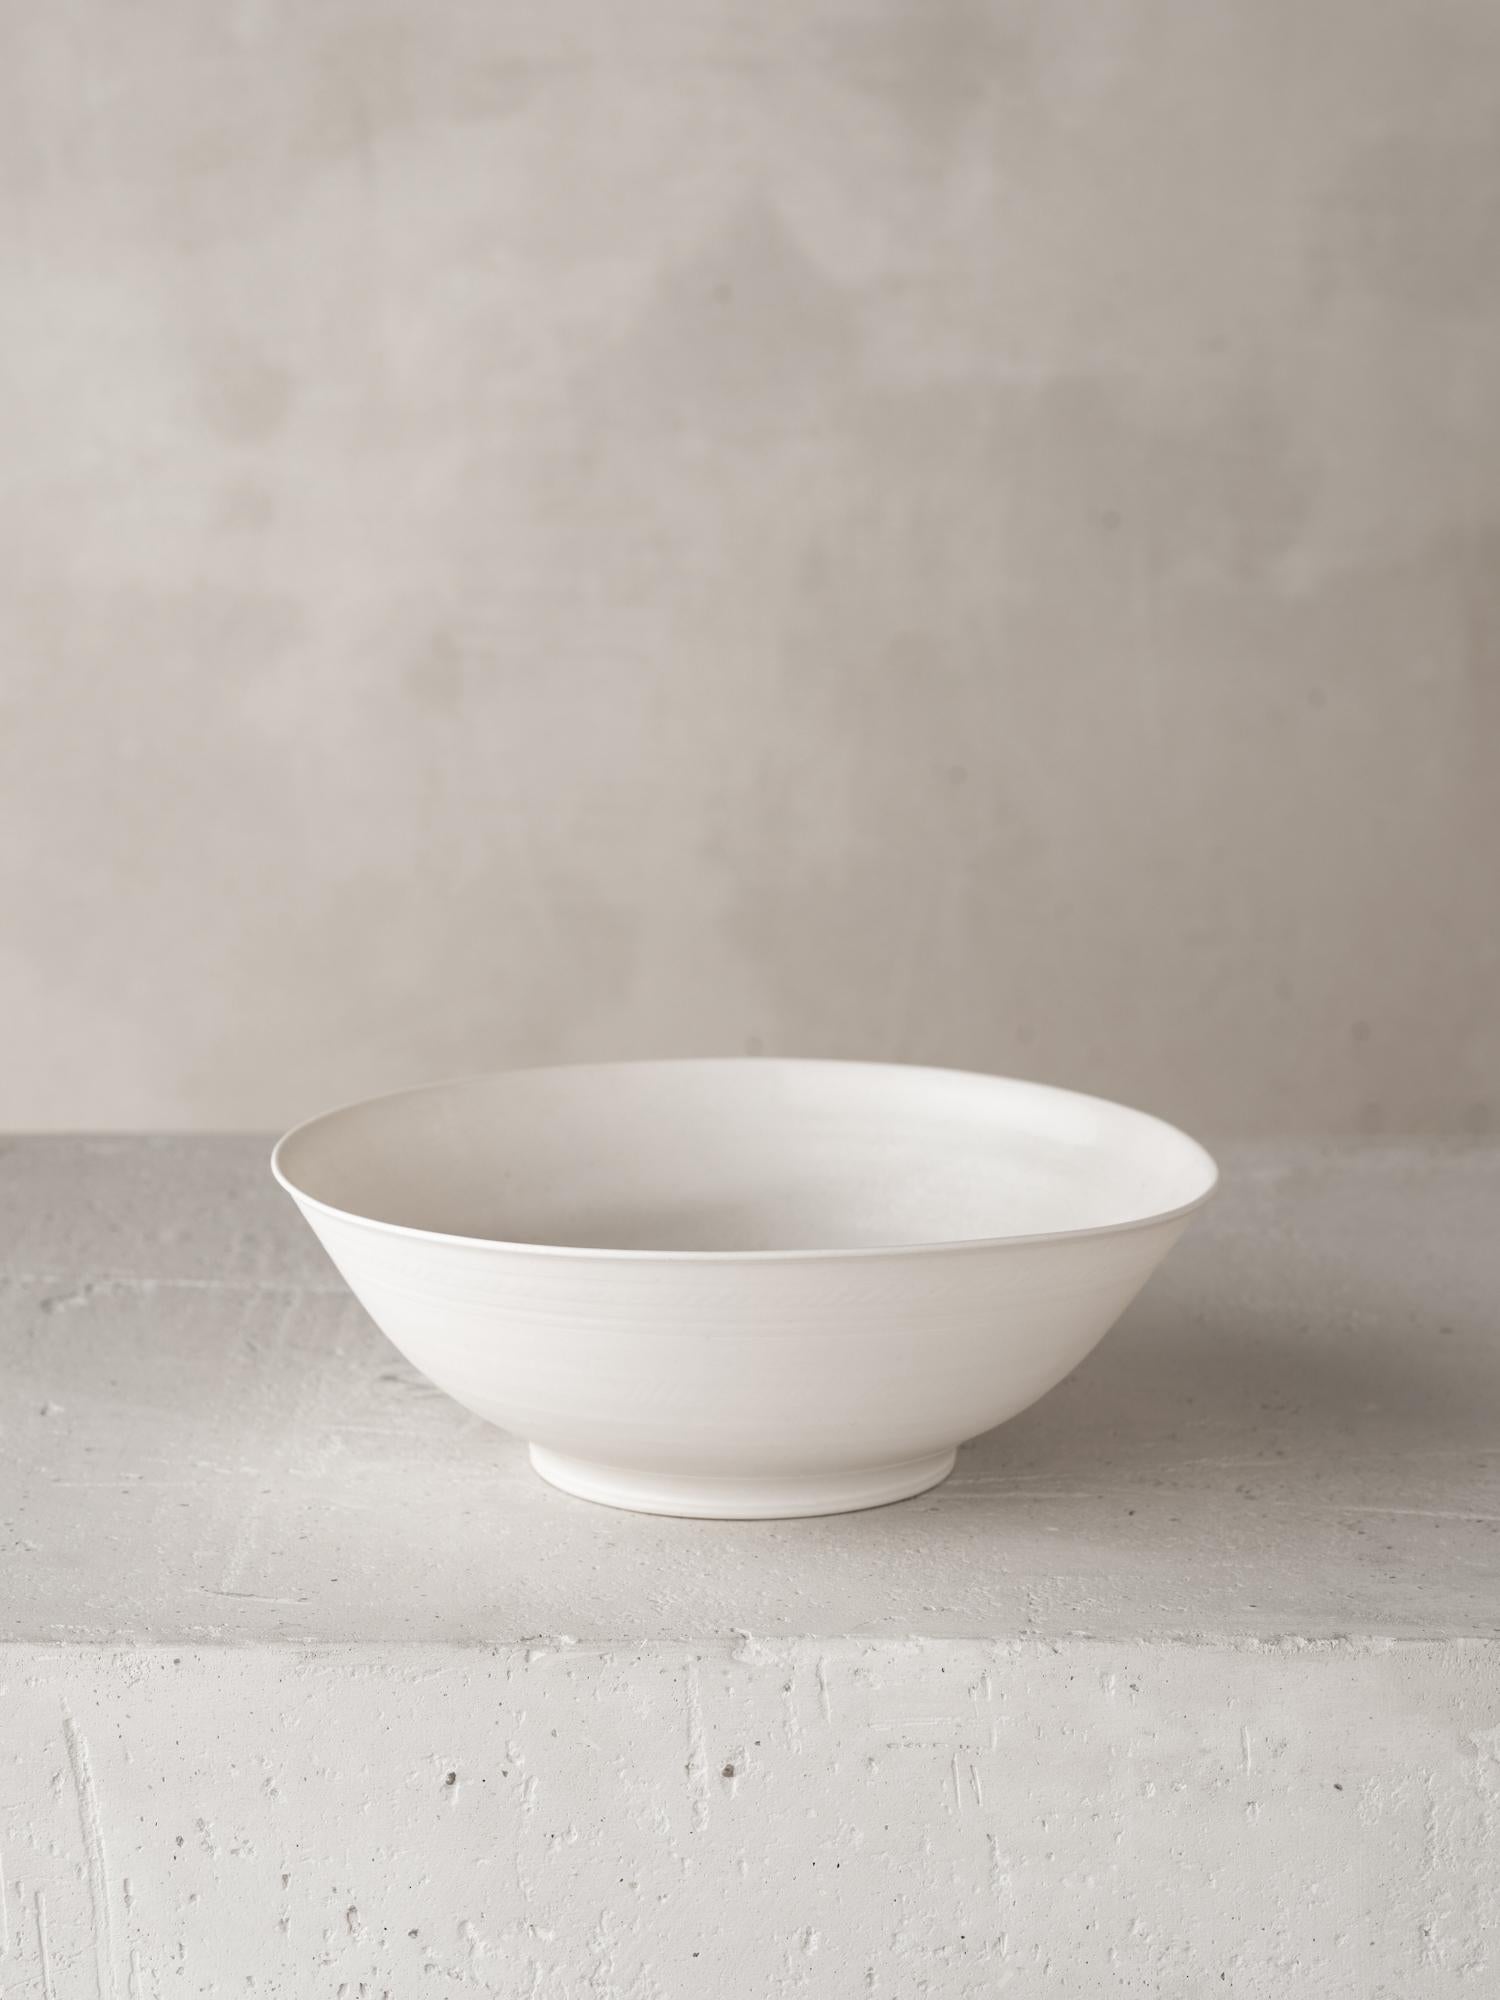 Contemporary Porcelain Bowl 230434 by Katherine Glenday For Sale